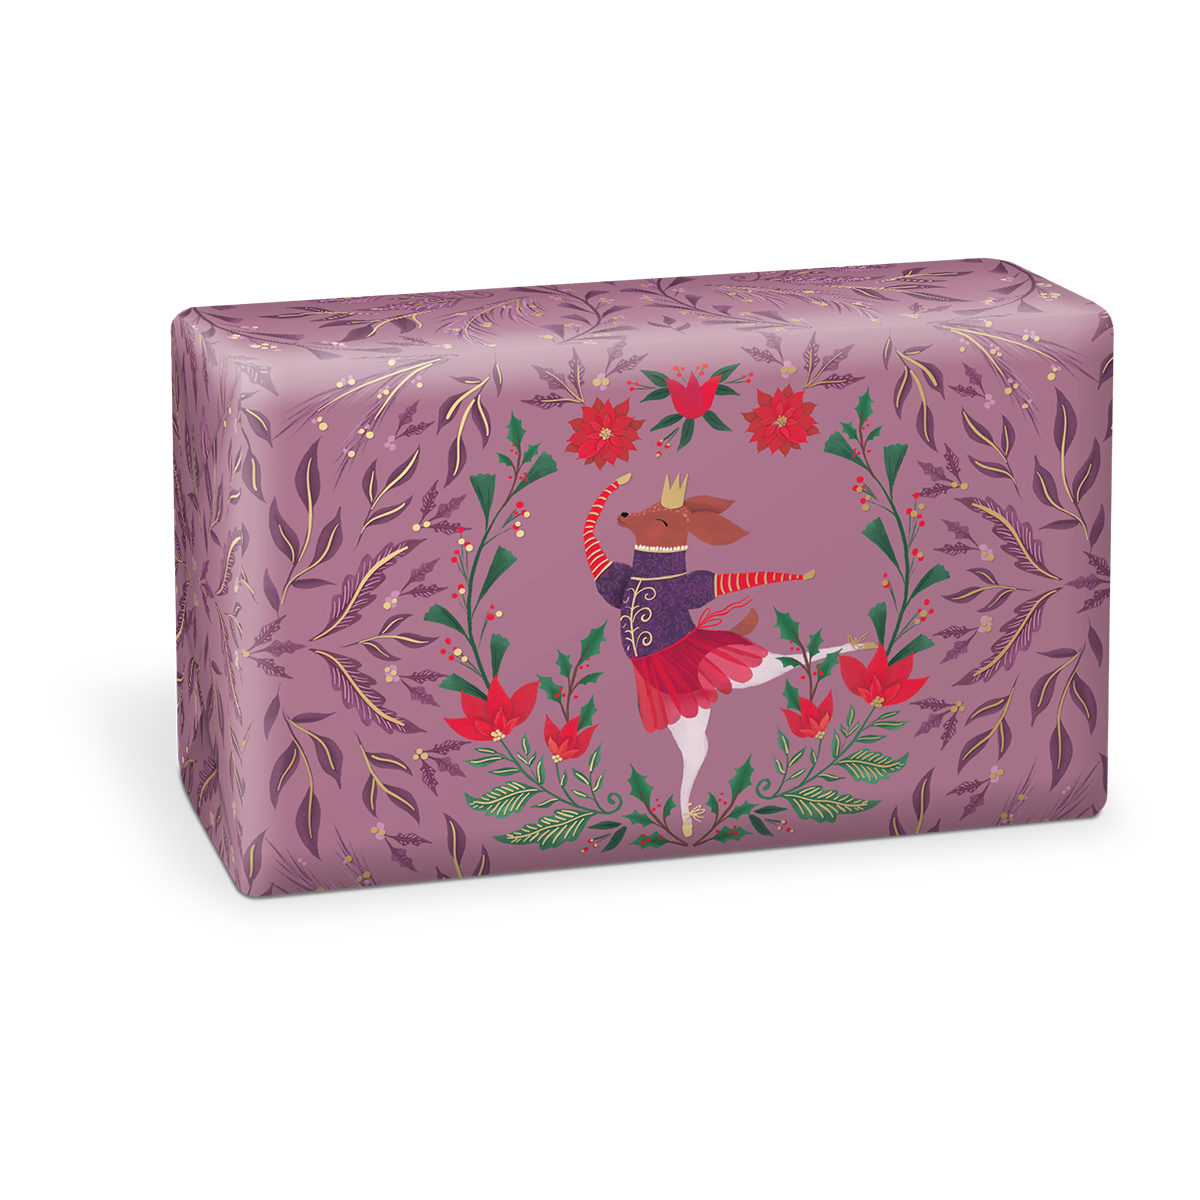 12 Days Deer Scented Bar Soap Product